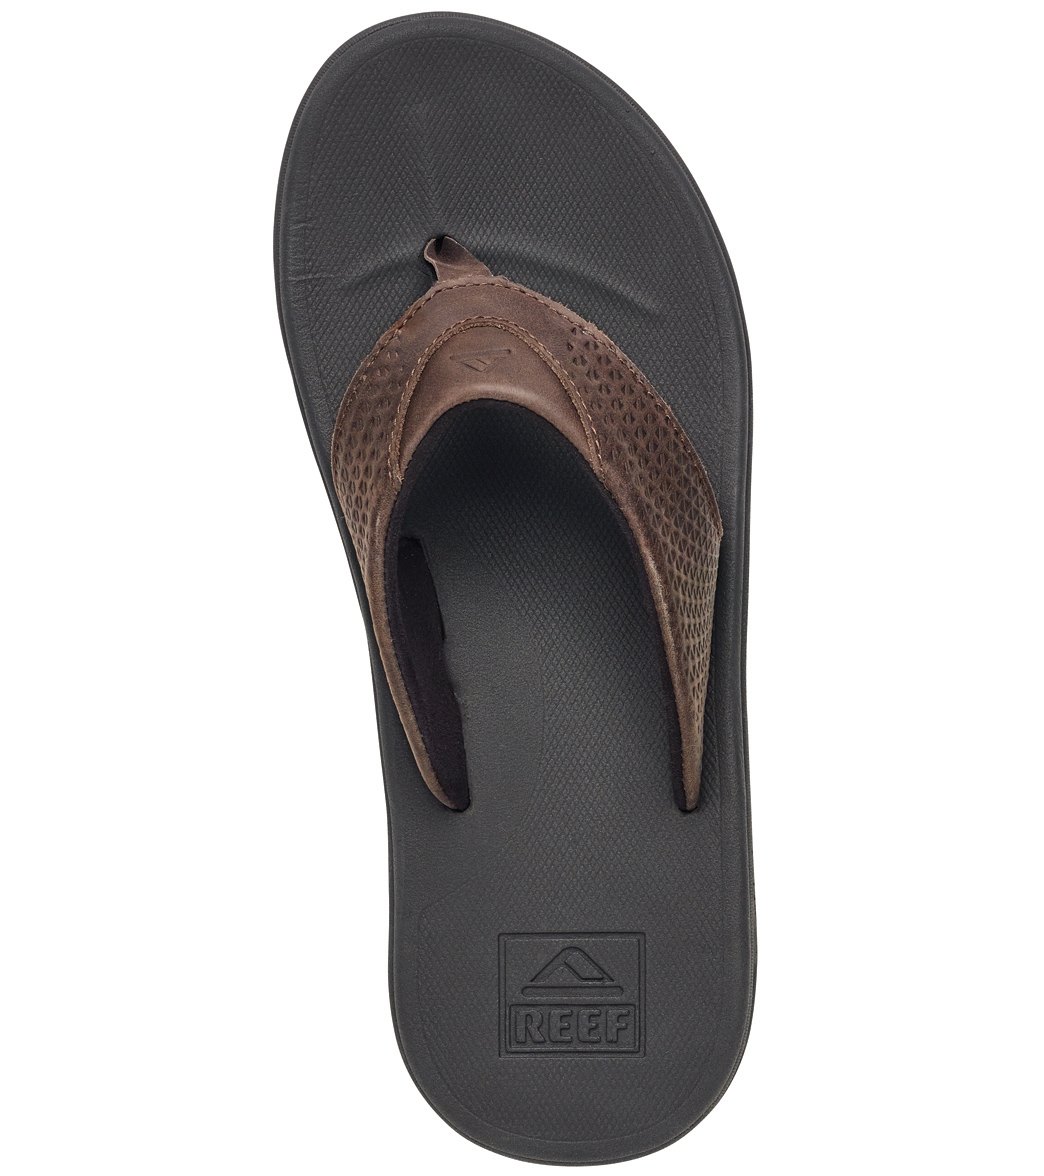 Reef Men's Rover LE Flip Flop at SwimOutlet.com - Free Shipping